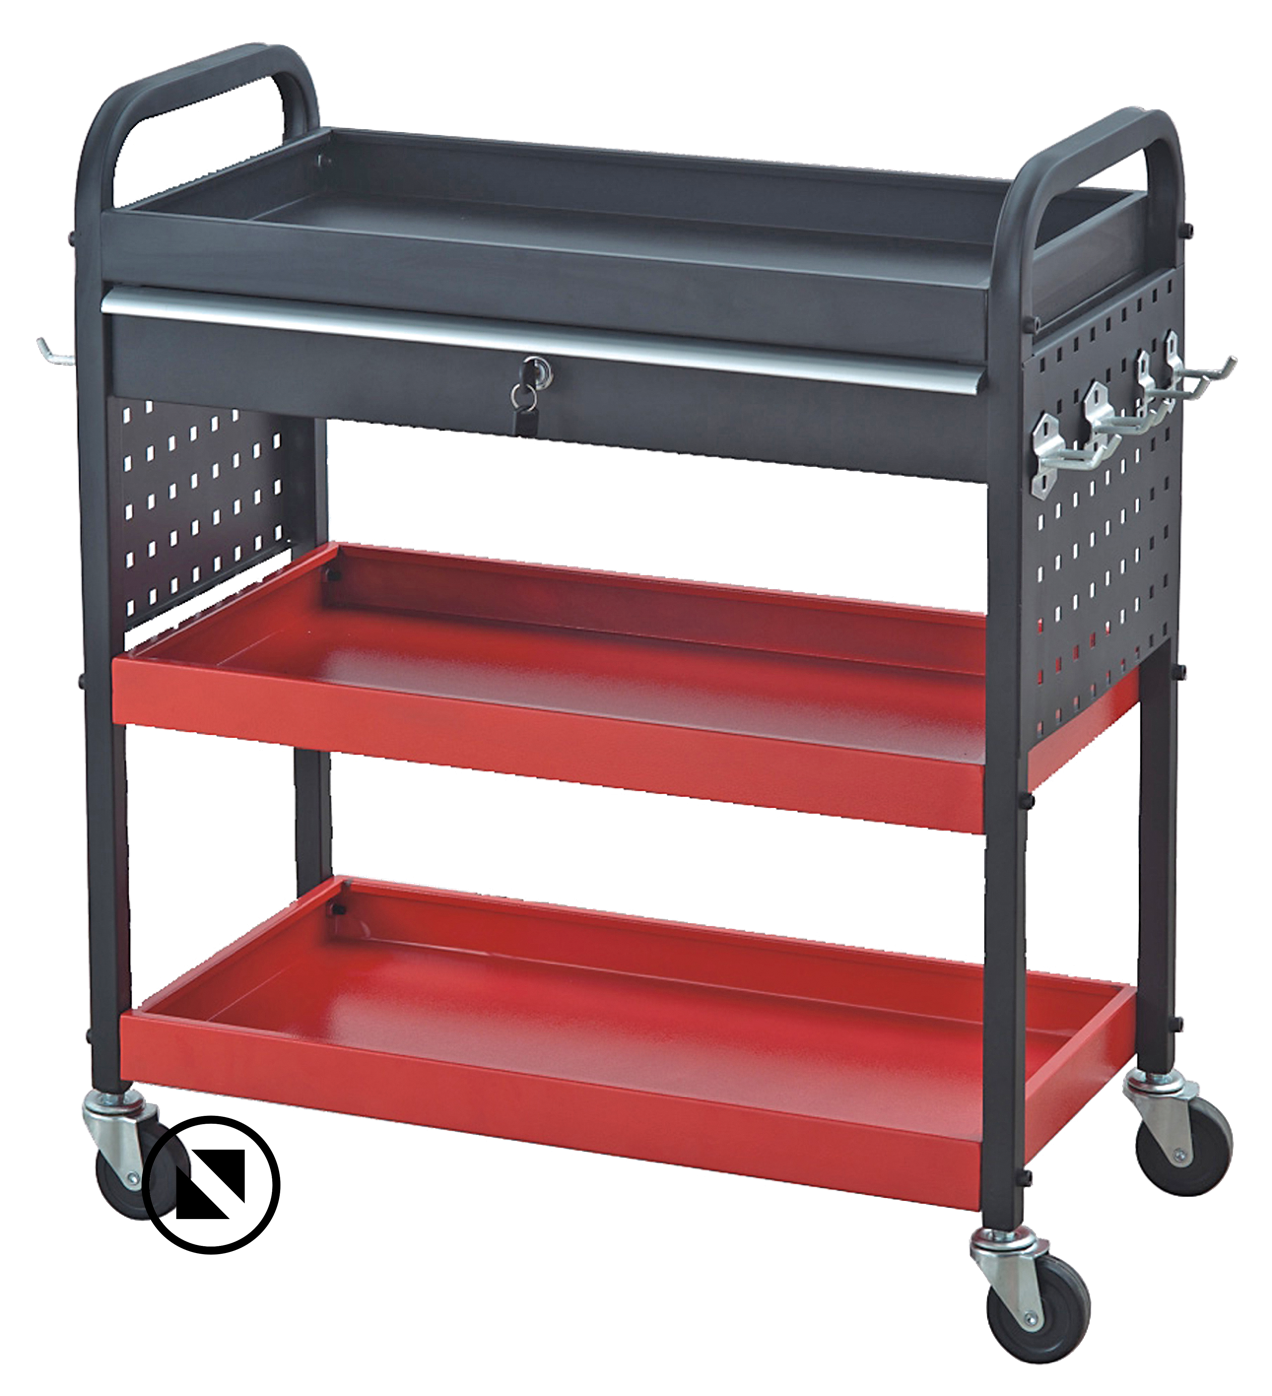 An ideal trolley for commercial workshops and home use…Capacity: 90kgs 